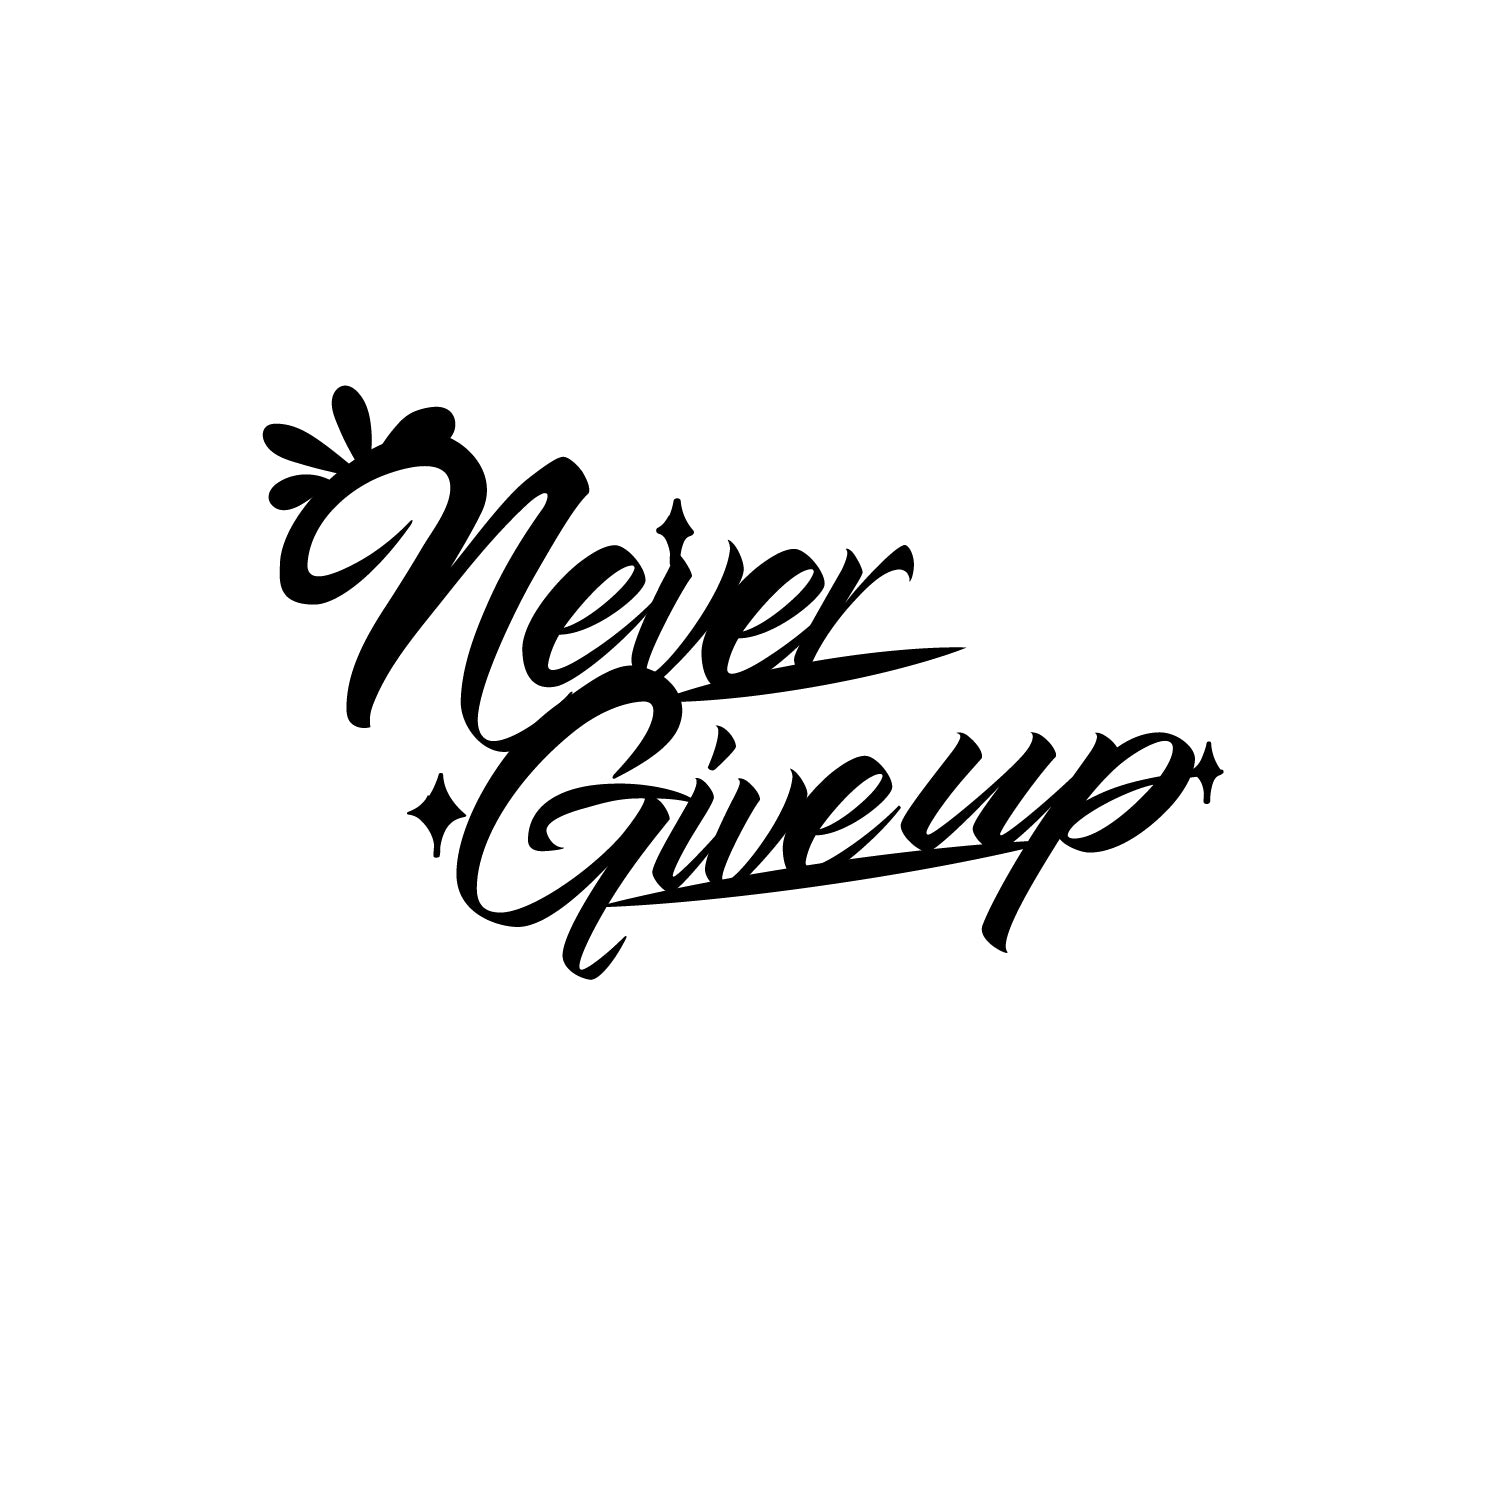 Never Give Up Black Engineered Wood Wall Art Cutout, Ready To Hang Home Decor